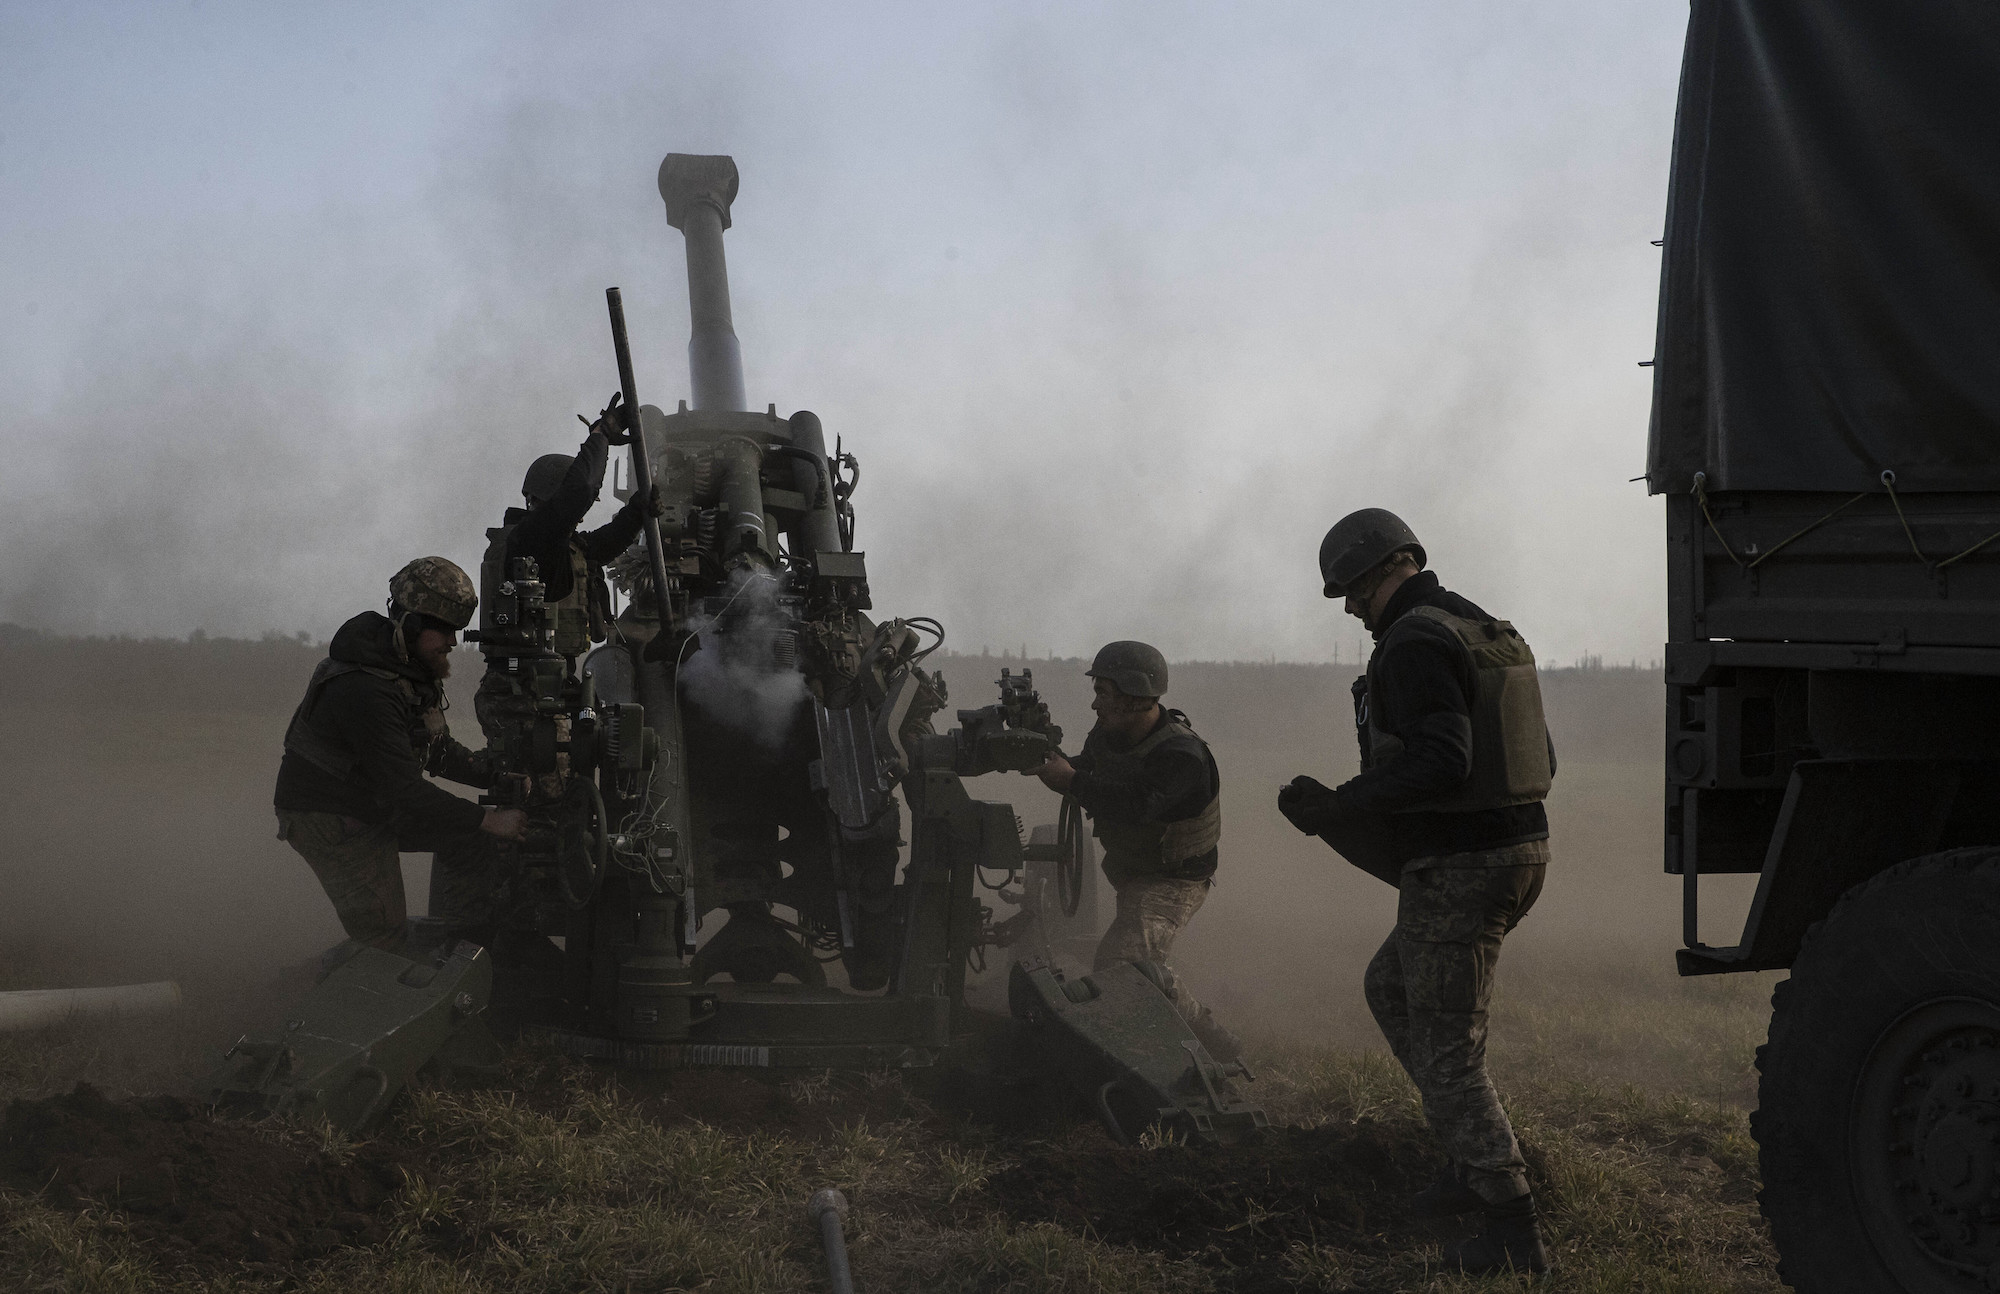 Ukrainian artillerymen attached to the 59th Mechanized Brigade opened fire on Russian troops in Kherson Oblast on Saturday.